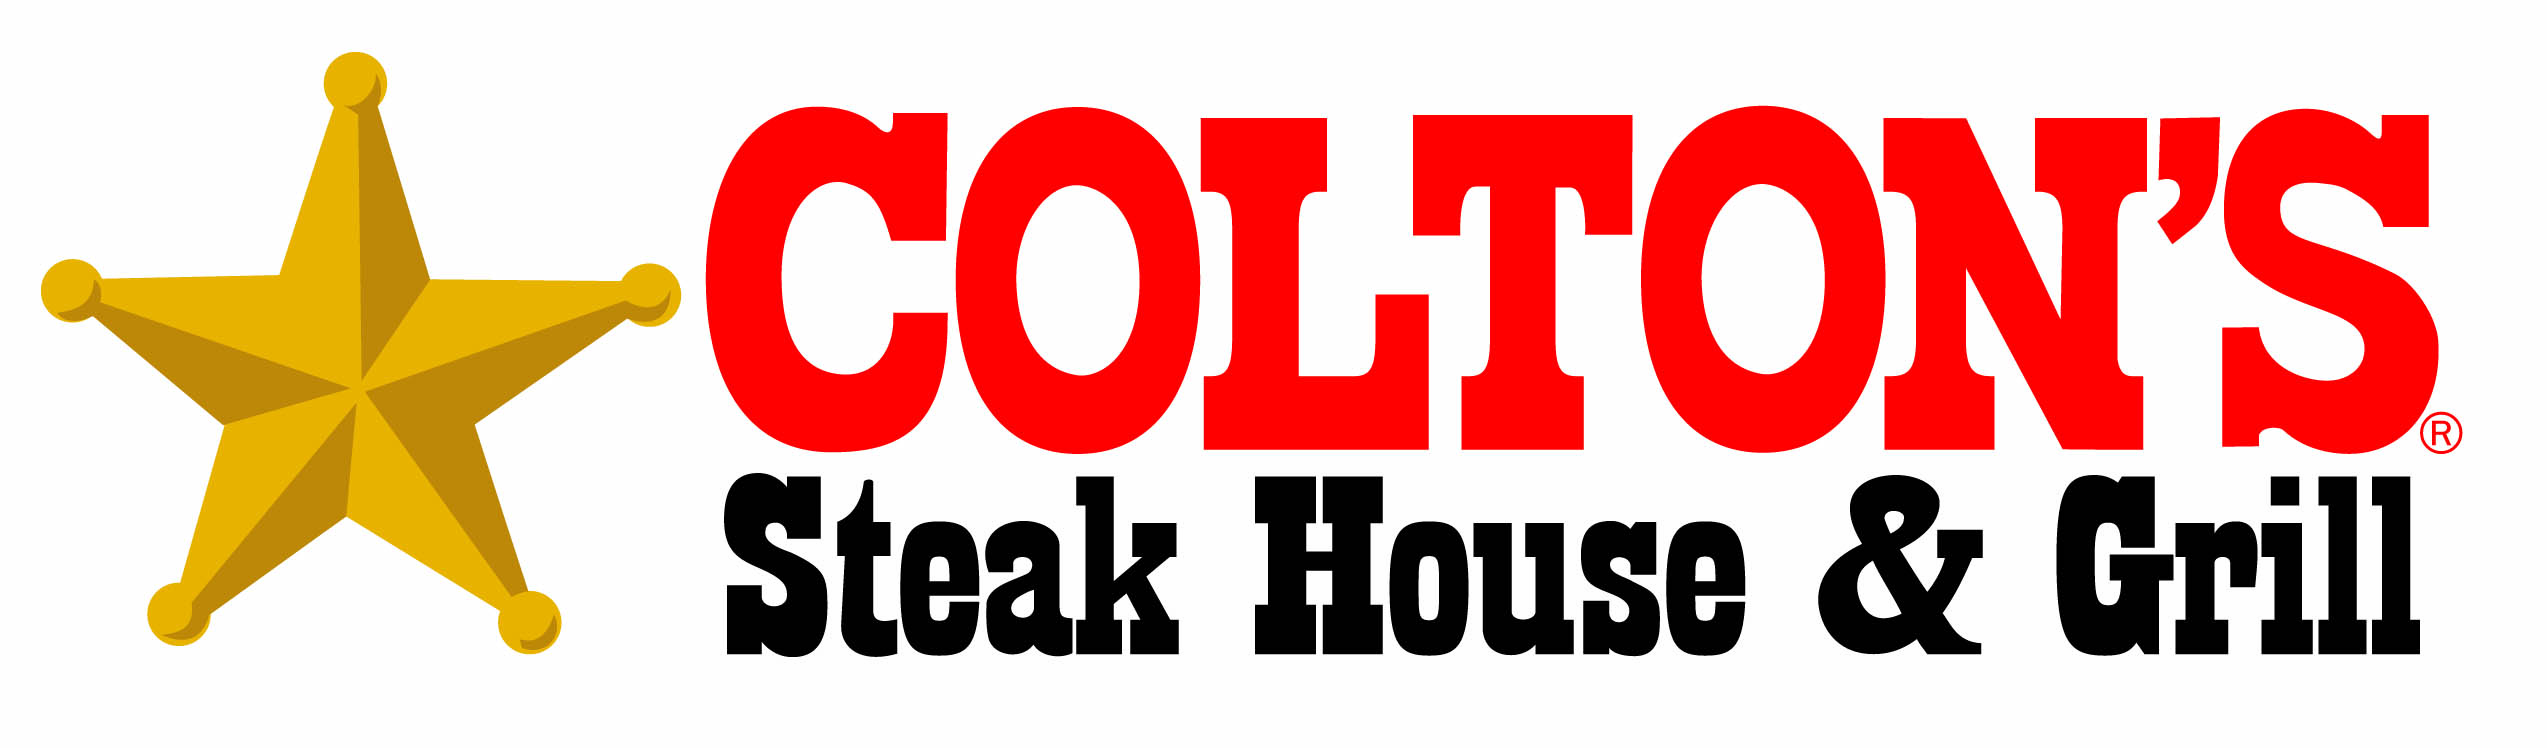 Coltons Steak House & Grill